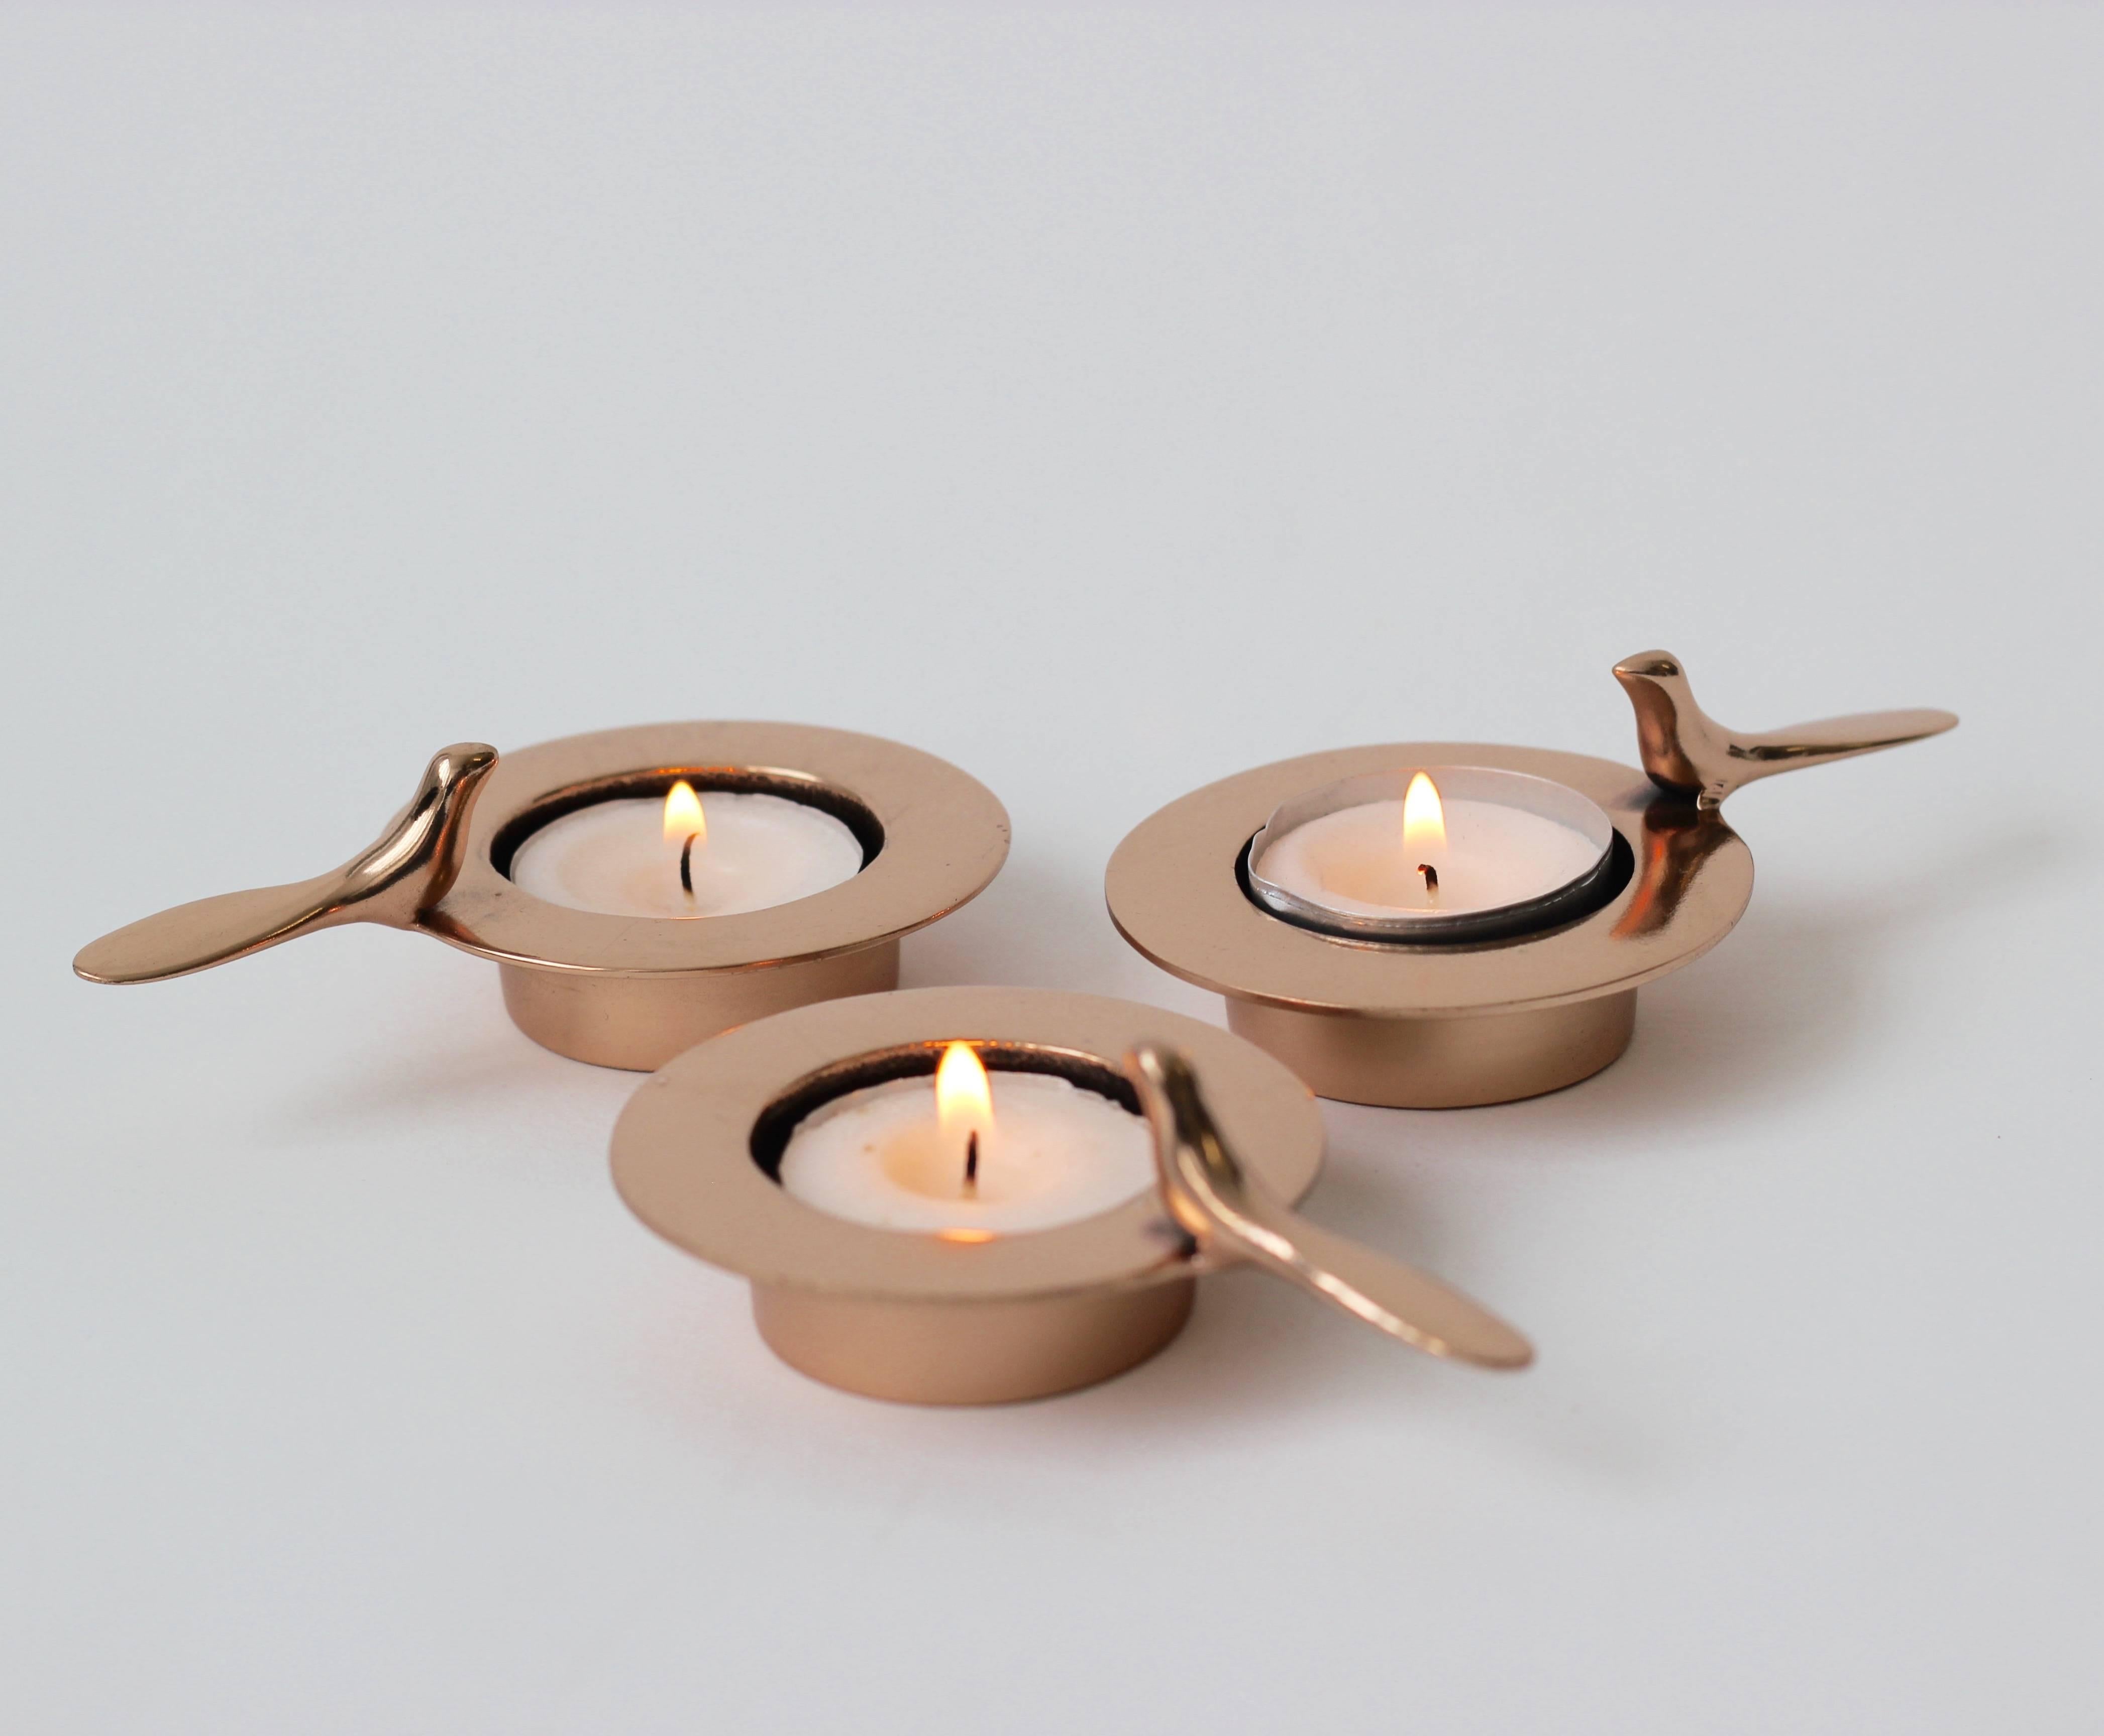 Set of three each of those original and elegant bronze tea light holders is handmade individually. Cast using very traditional techniques, they are polished revealing the lustrous finish of this beautiful material.

Those decorative elements are